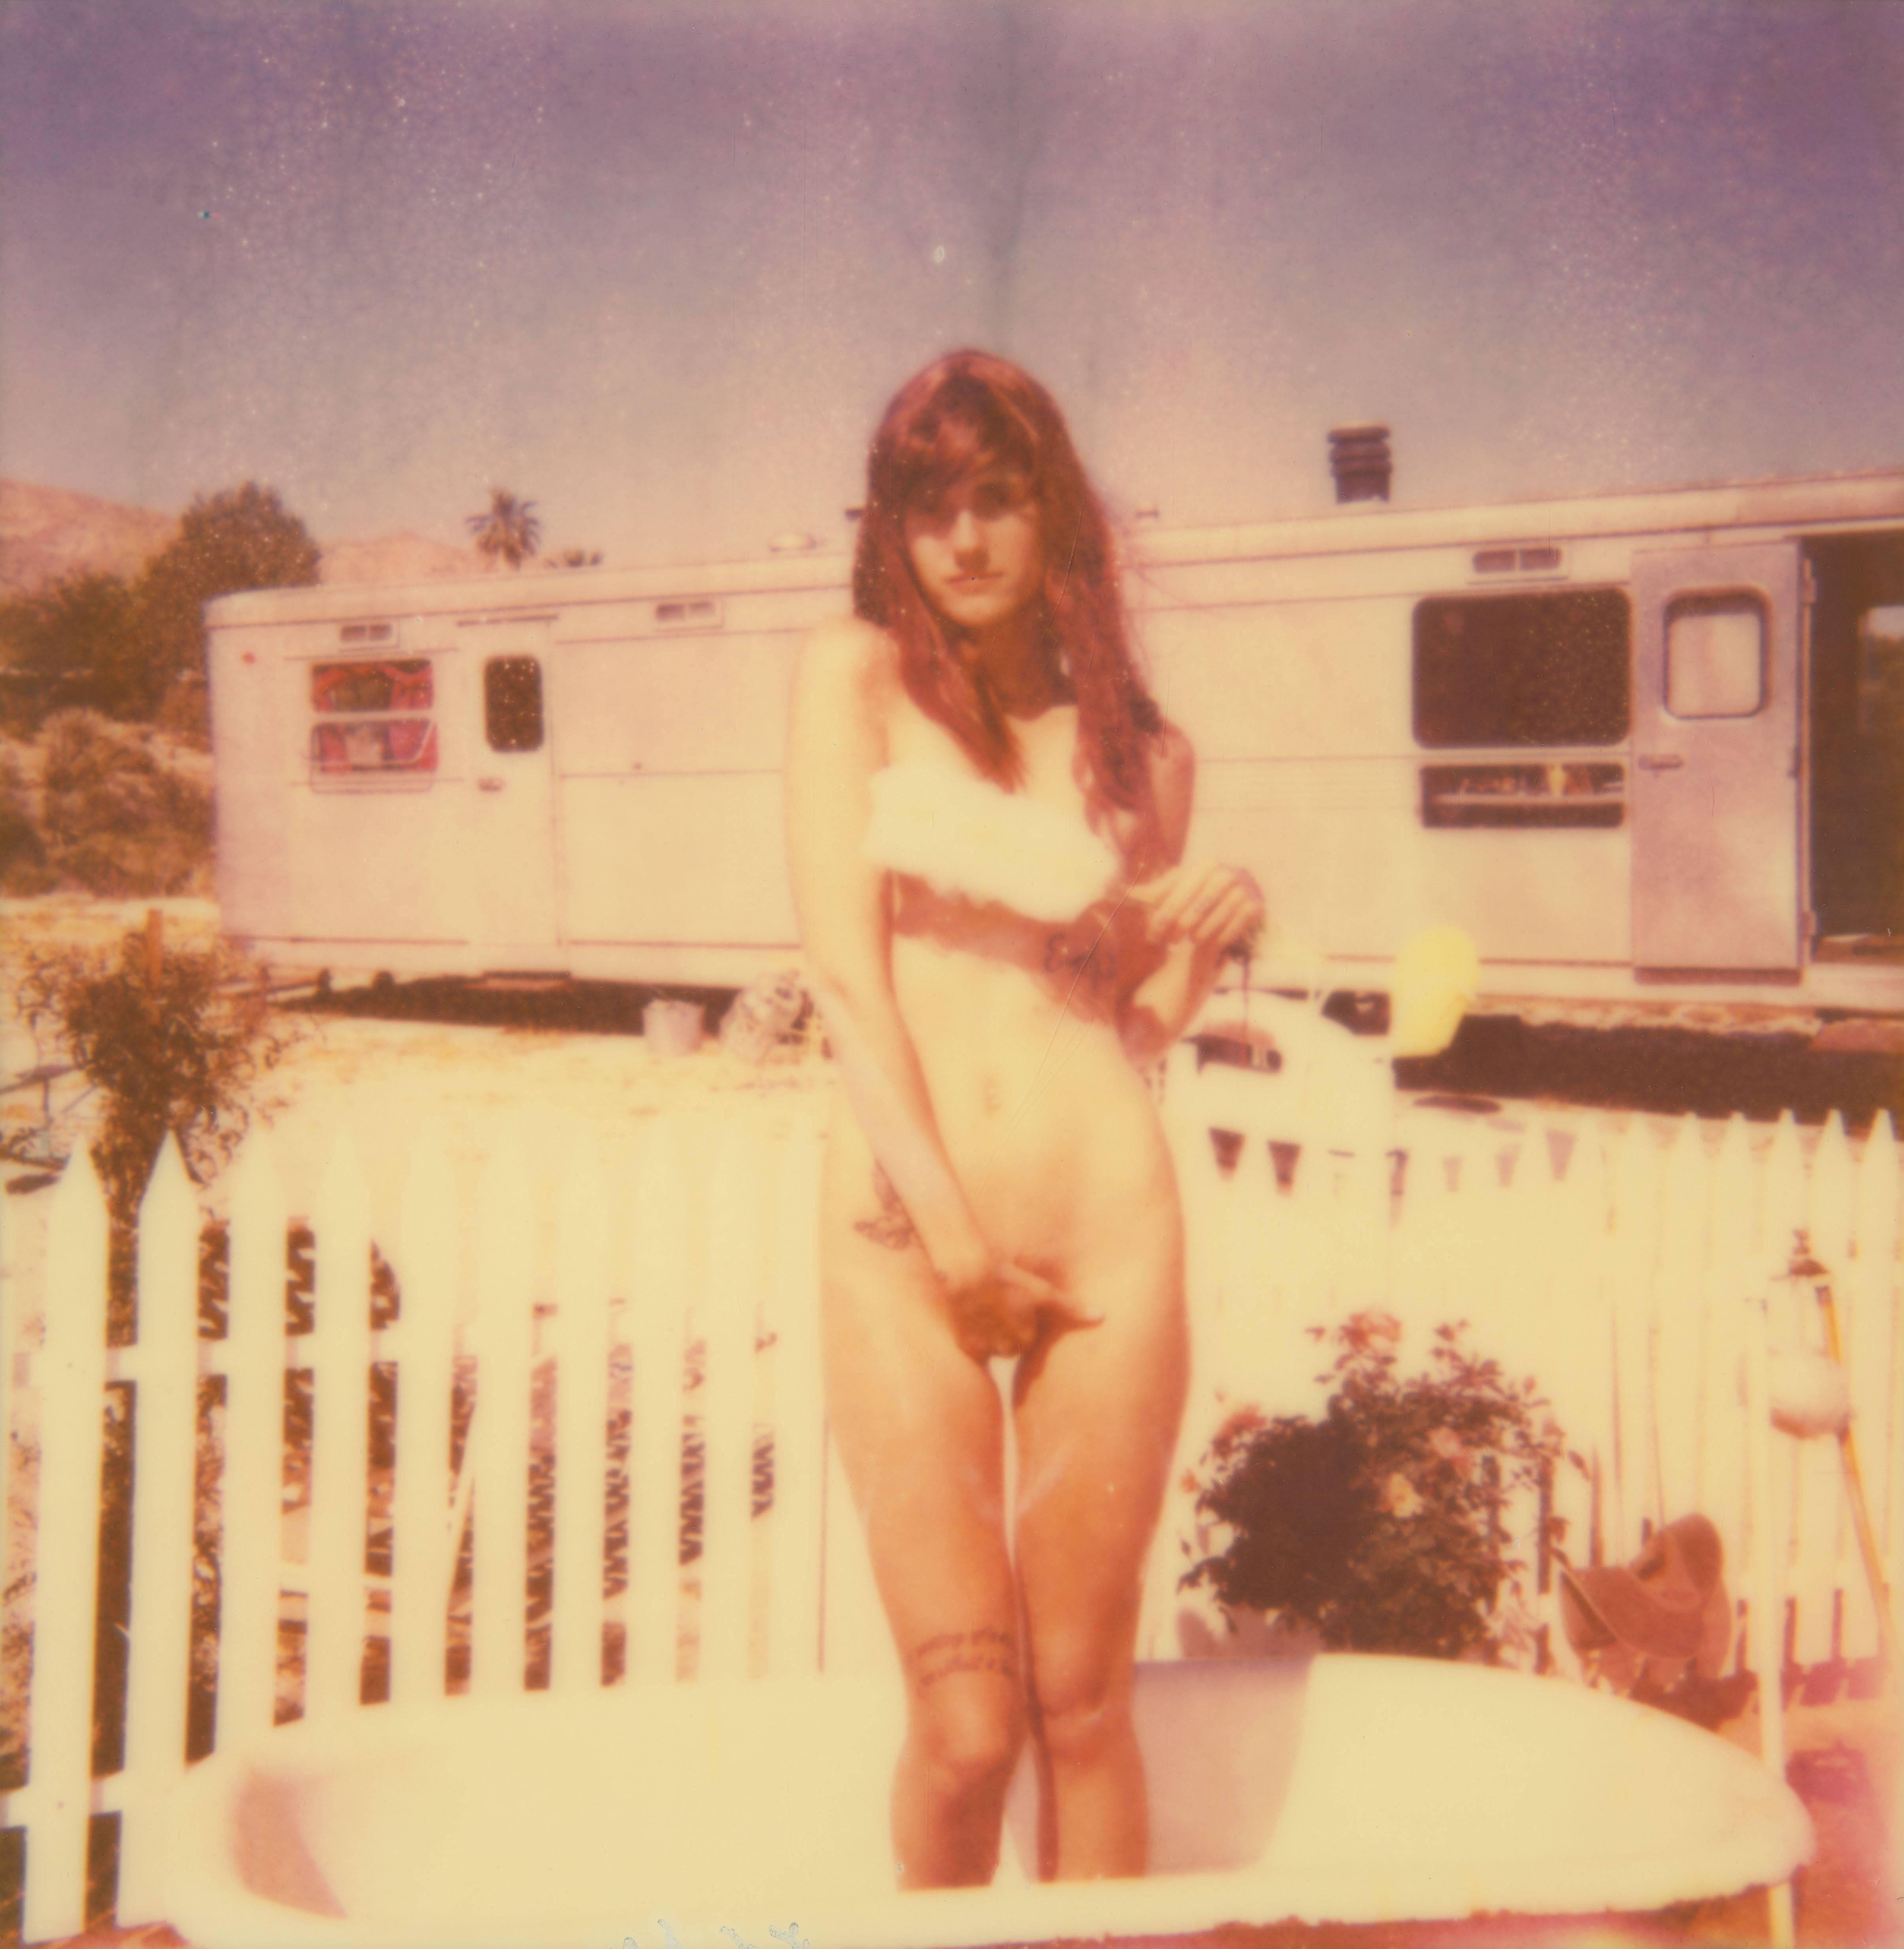 Stefanie Schneider Color Photograph - The Girl II (Behind the White Picket Fence) - based on a Polaroid, analog, color